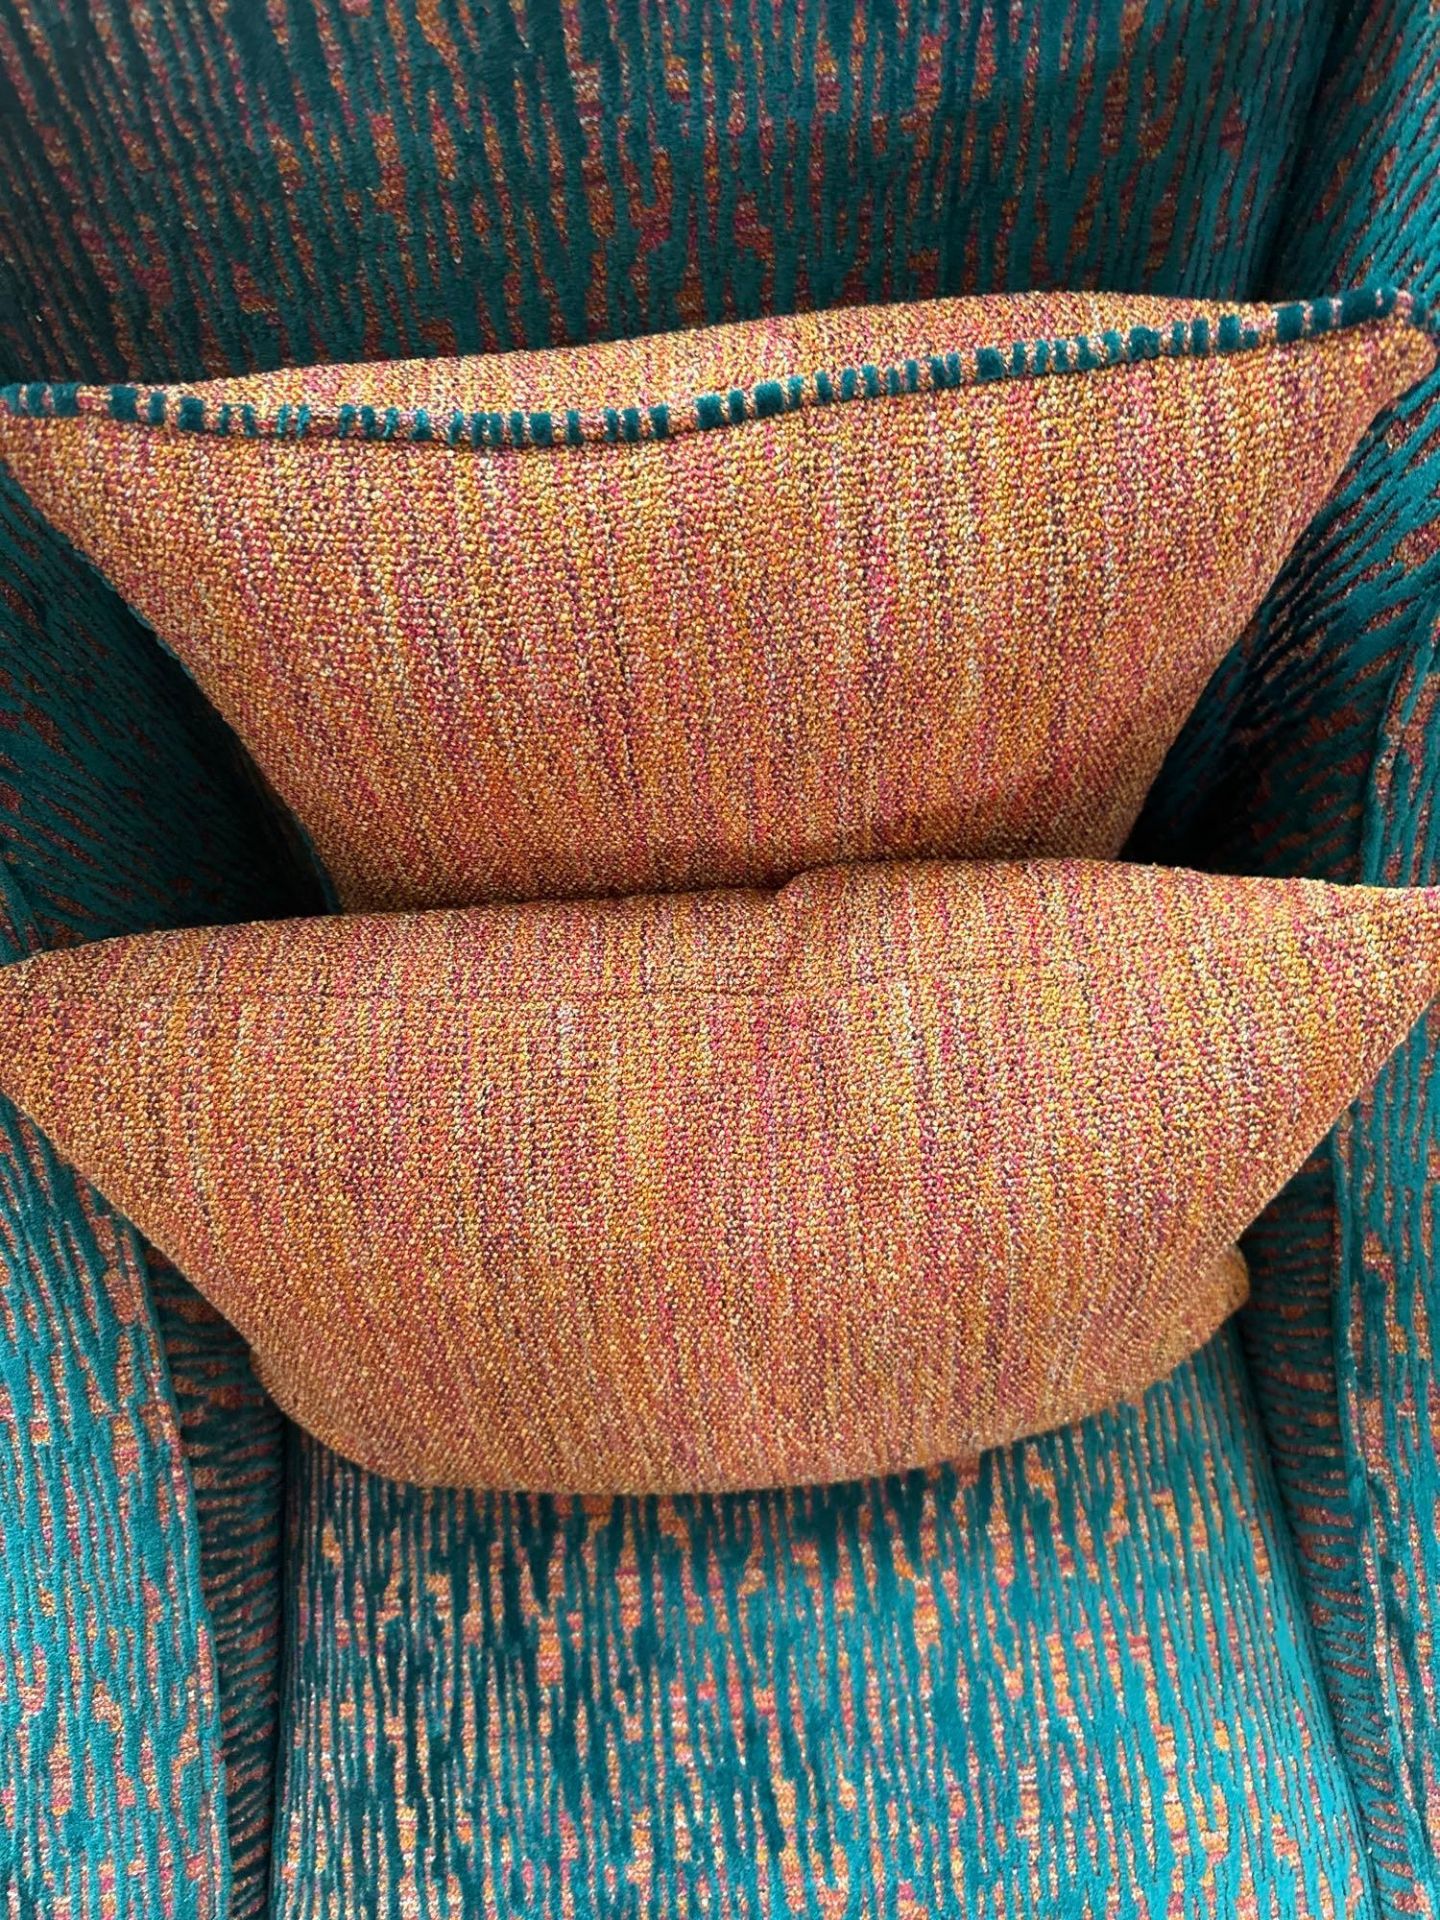 2 x Scatter Cushions In Prestige Fabric Fire â€“ A Tweed Style Fabric In Multi Tonal Shades 1 x 54 x - Image 2 of 2